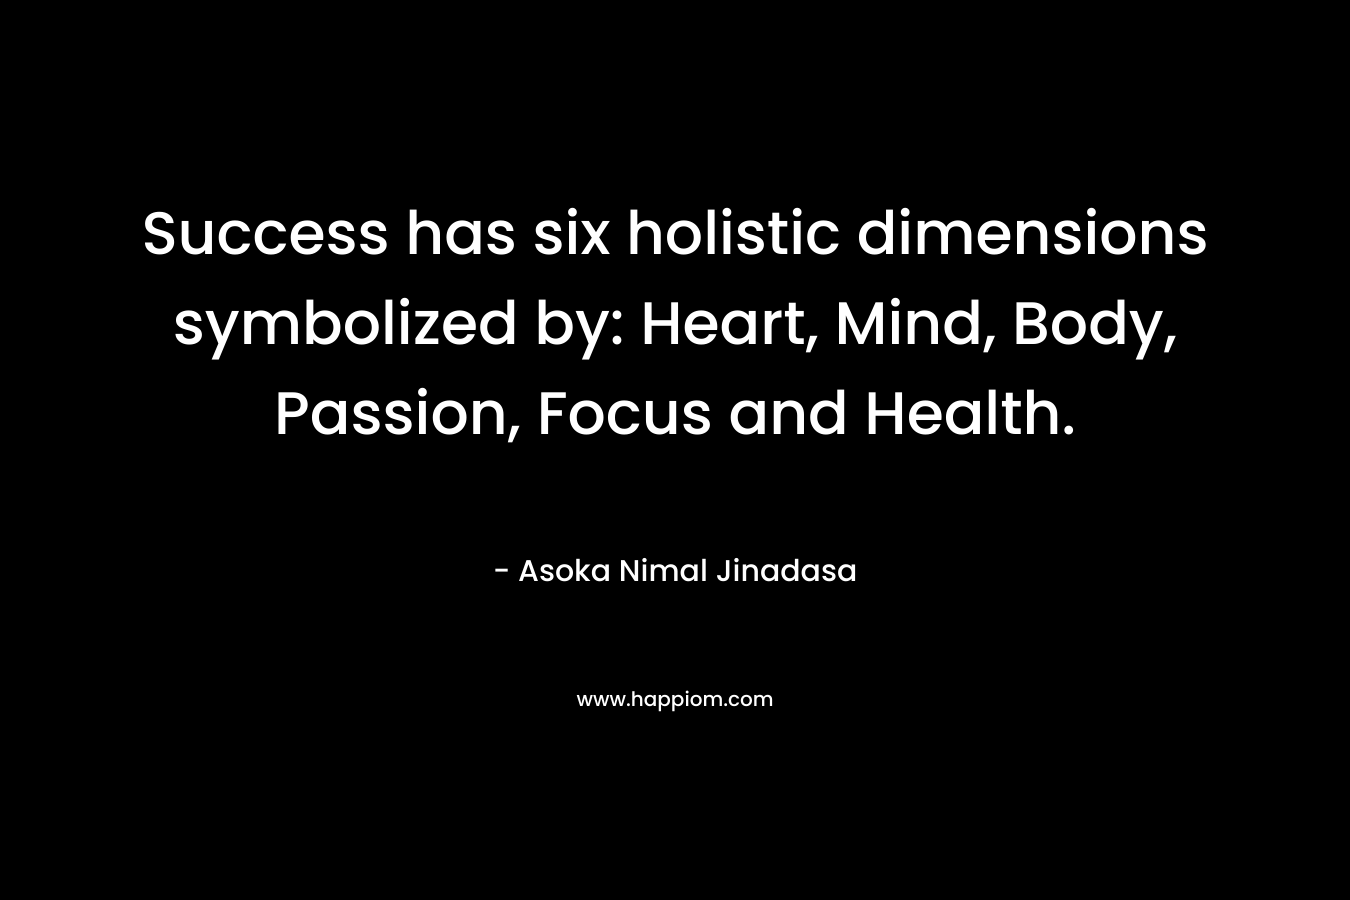 Success has six holistic dimensions symbolized by: Heart, Mind, Body, Passion, Focus and Health.